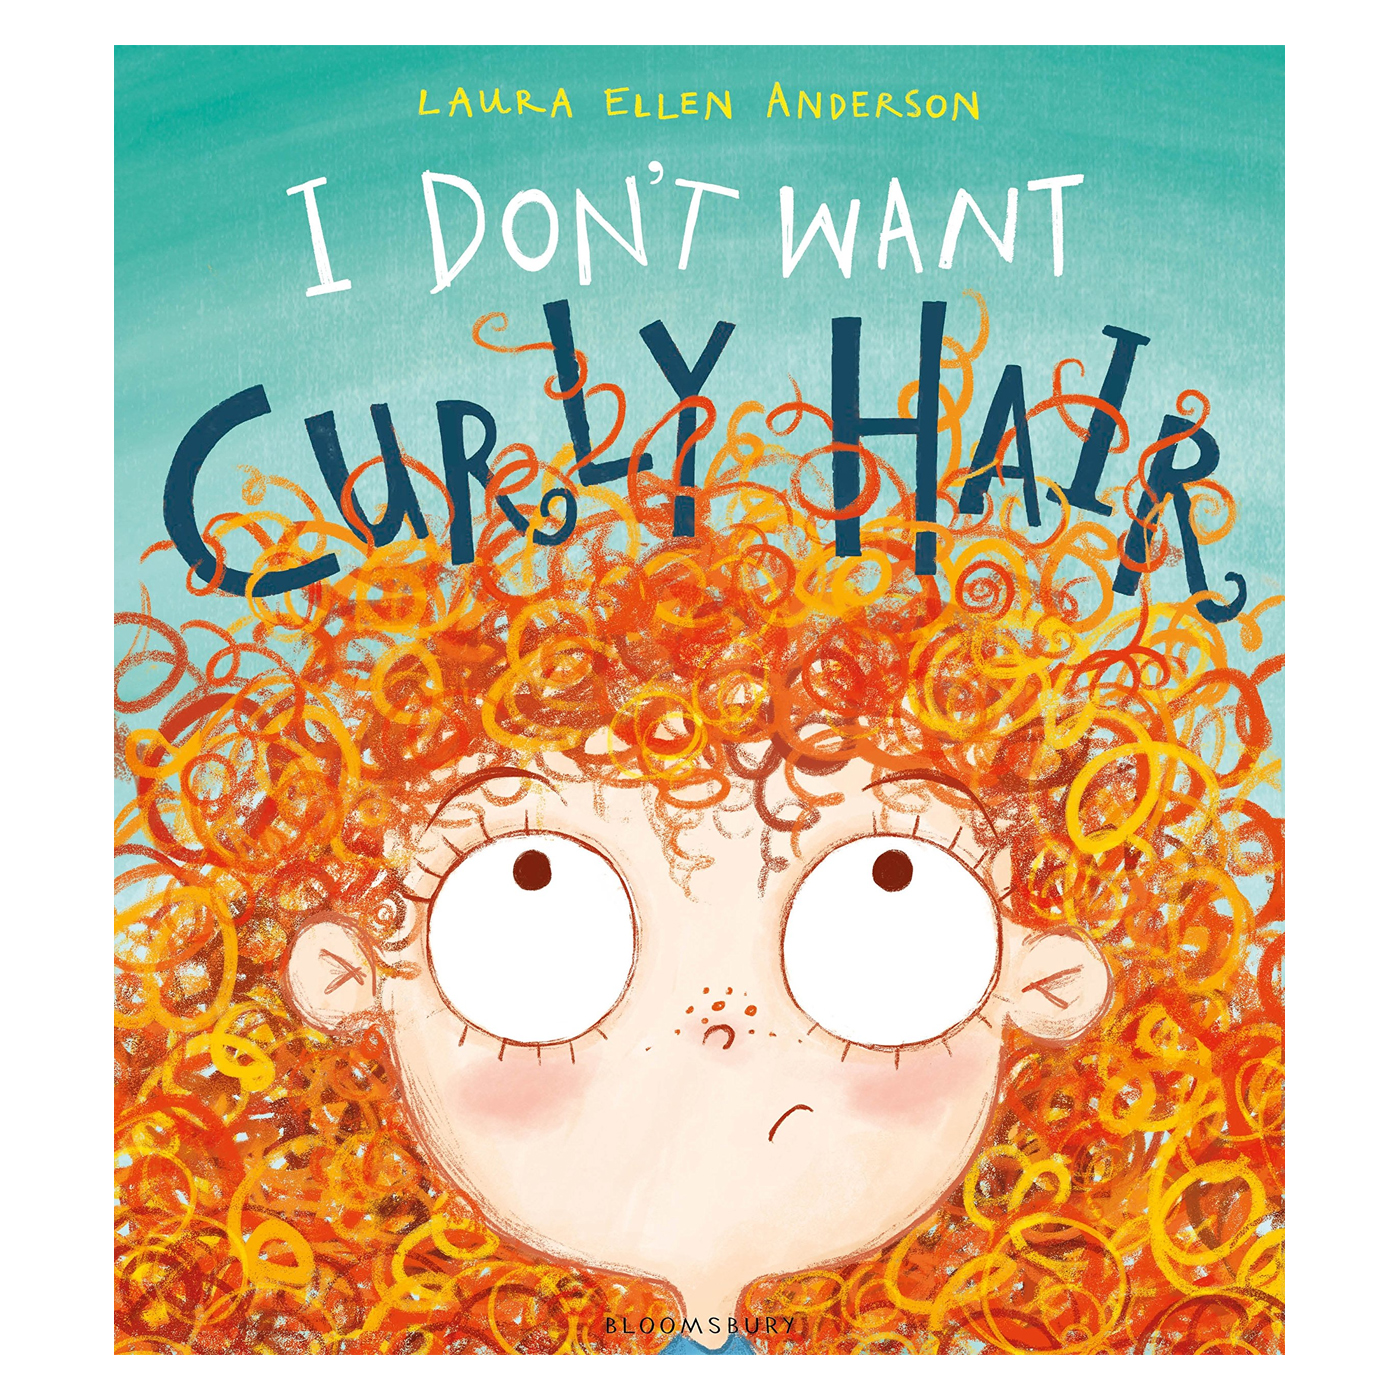  I Don't Want Curly Hair